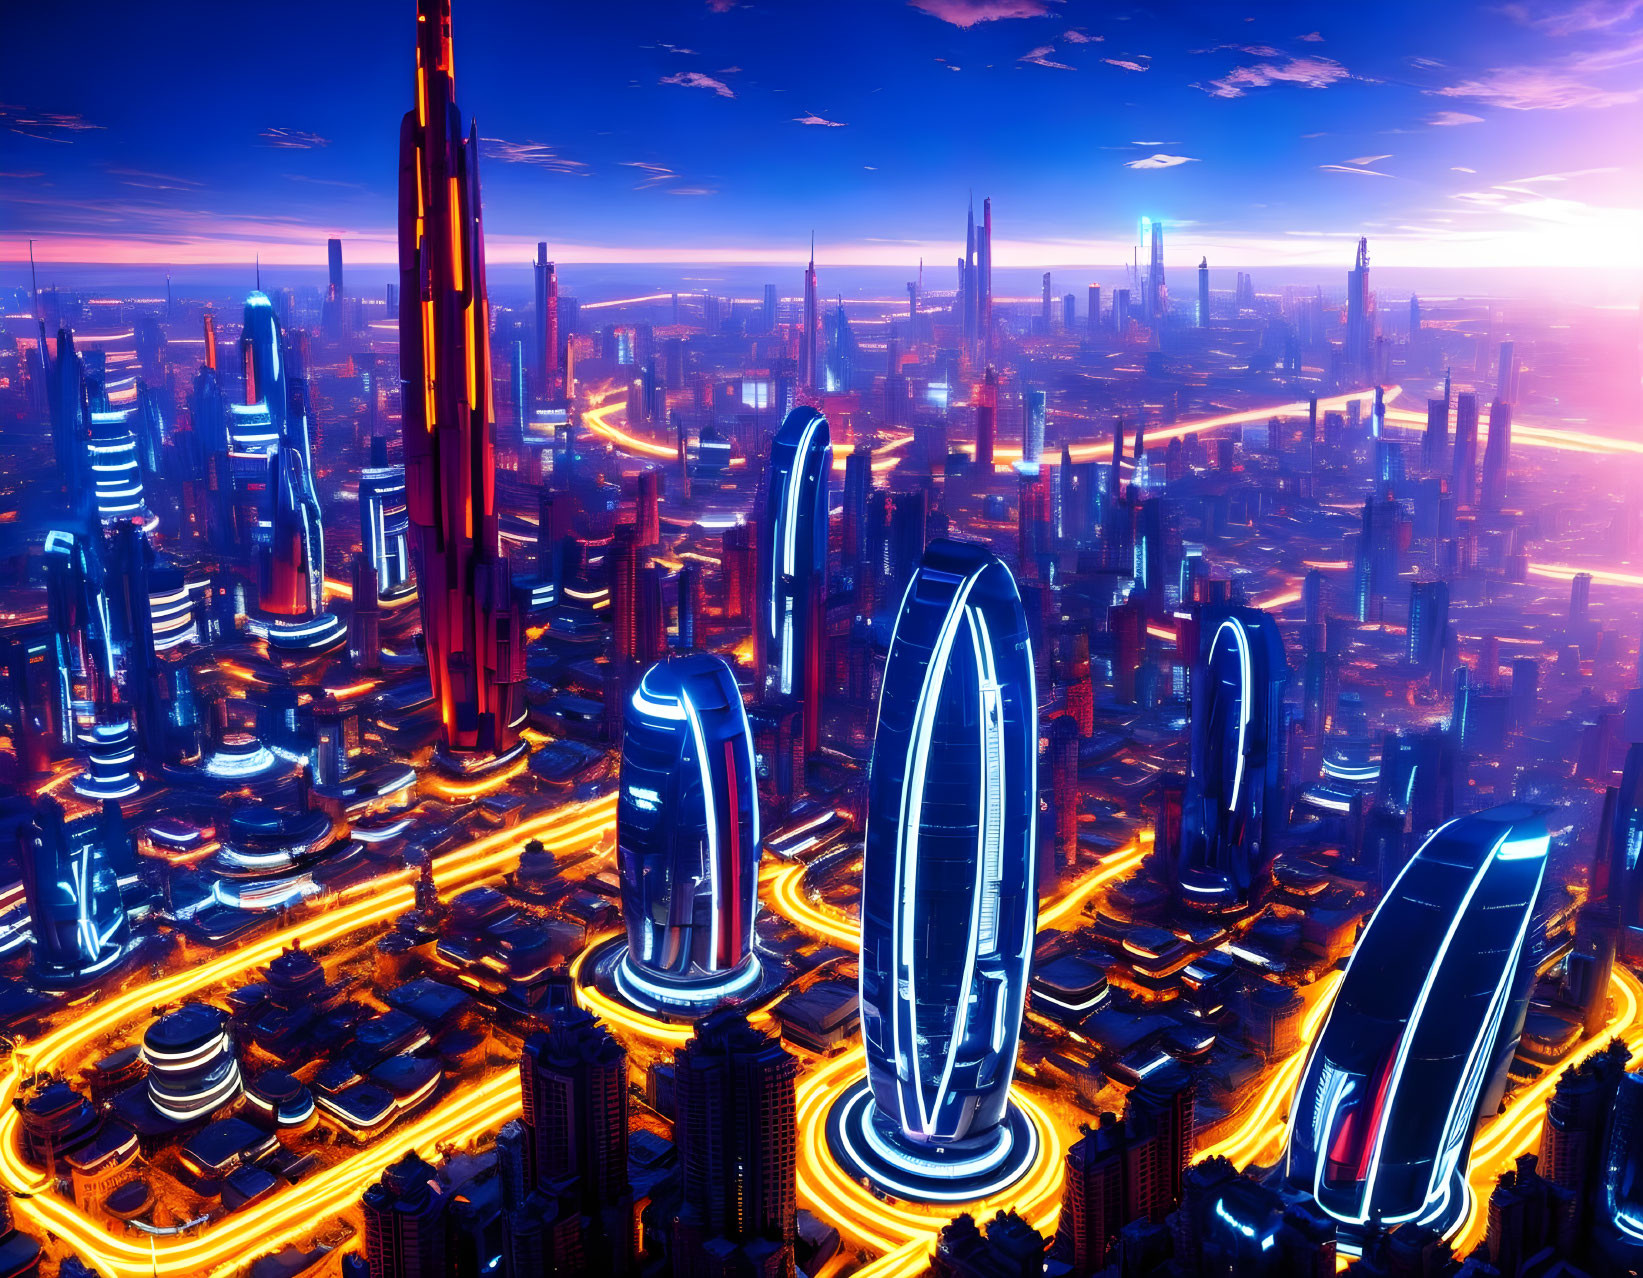 Futuristic cityscape at dusk: neon lights, skyscrapers, glowing roadways